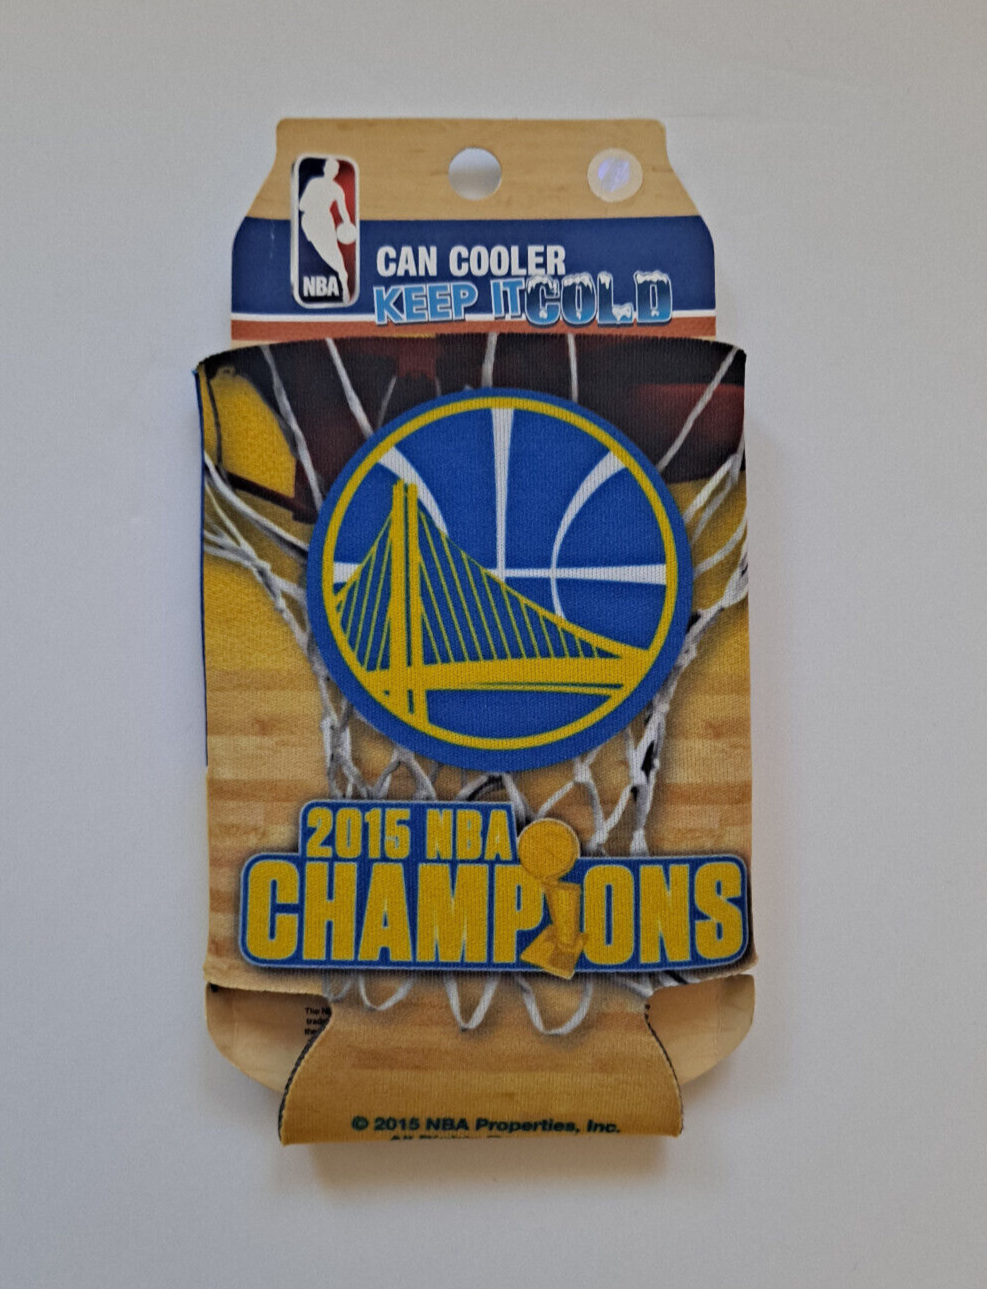 GOLDEN STATE WARRIORS NBA 2015 CHAMPIONS NBA CAN BOTTLE COOZIE KOOZIE COOLER - £6.71 GBP